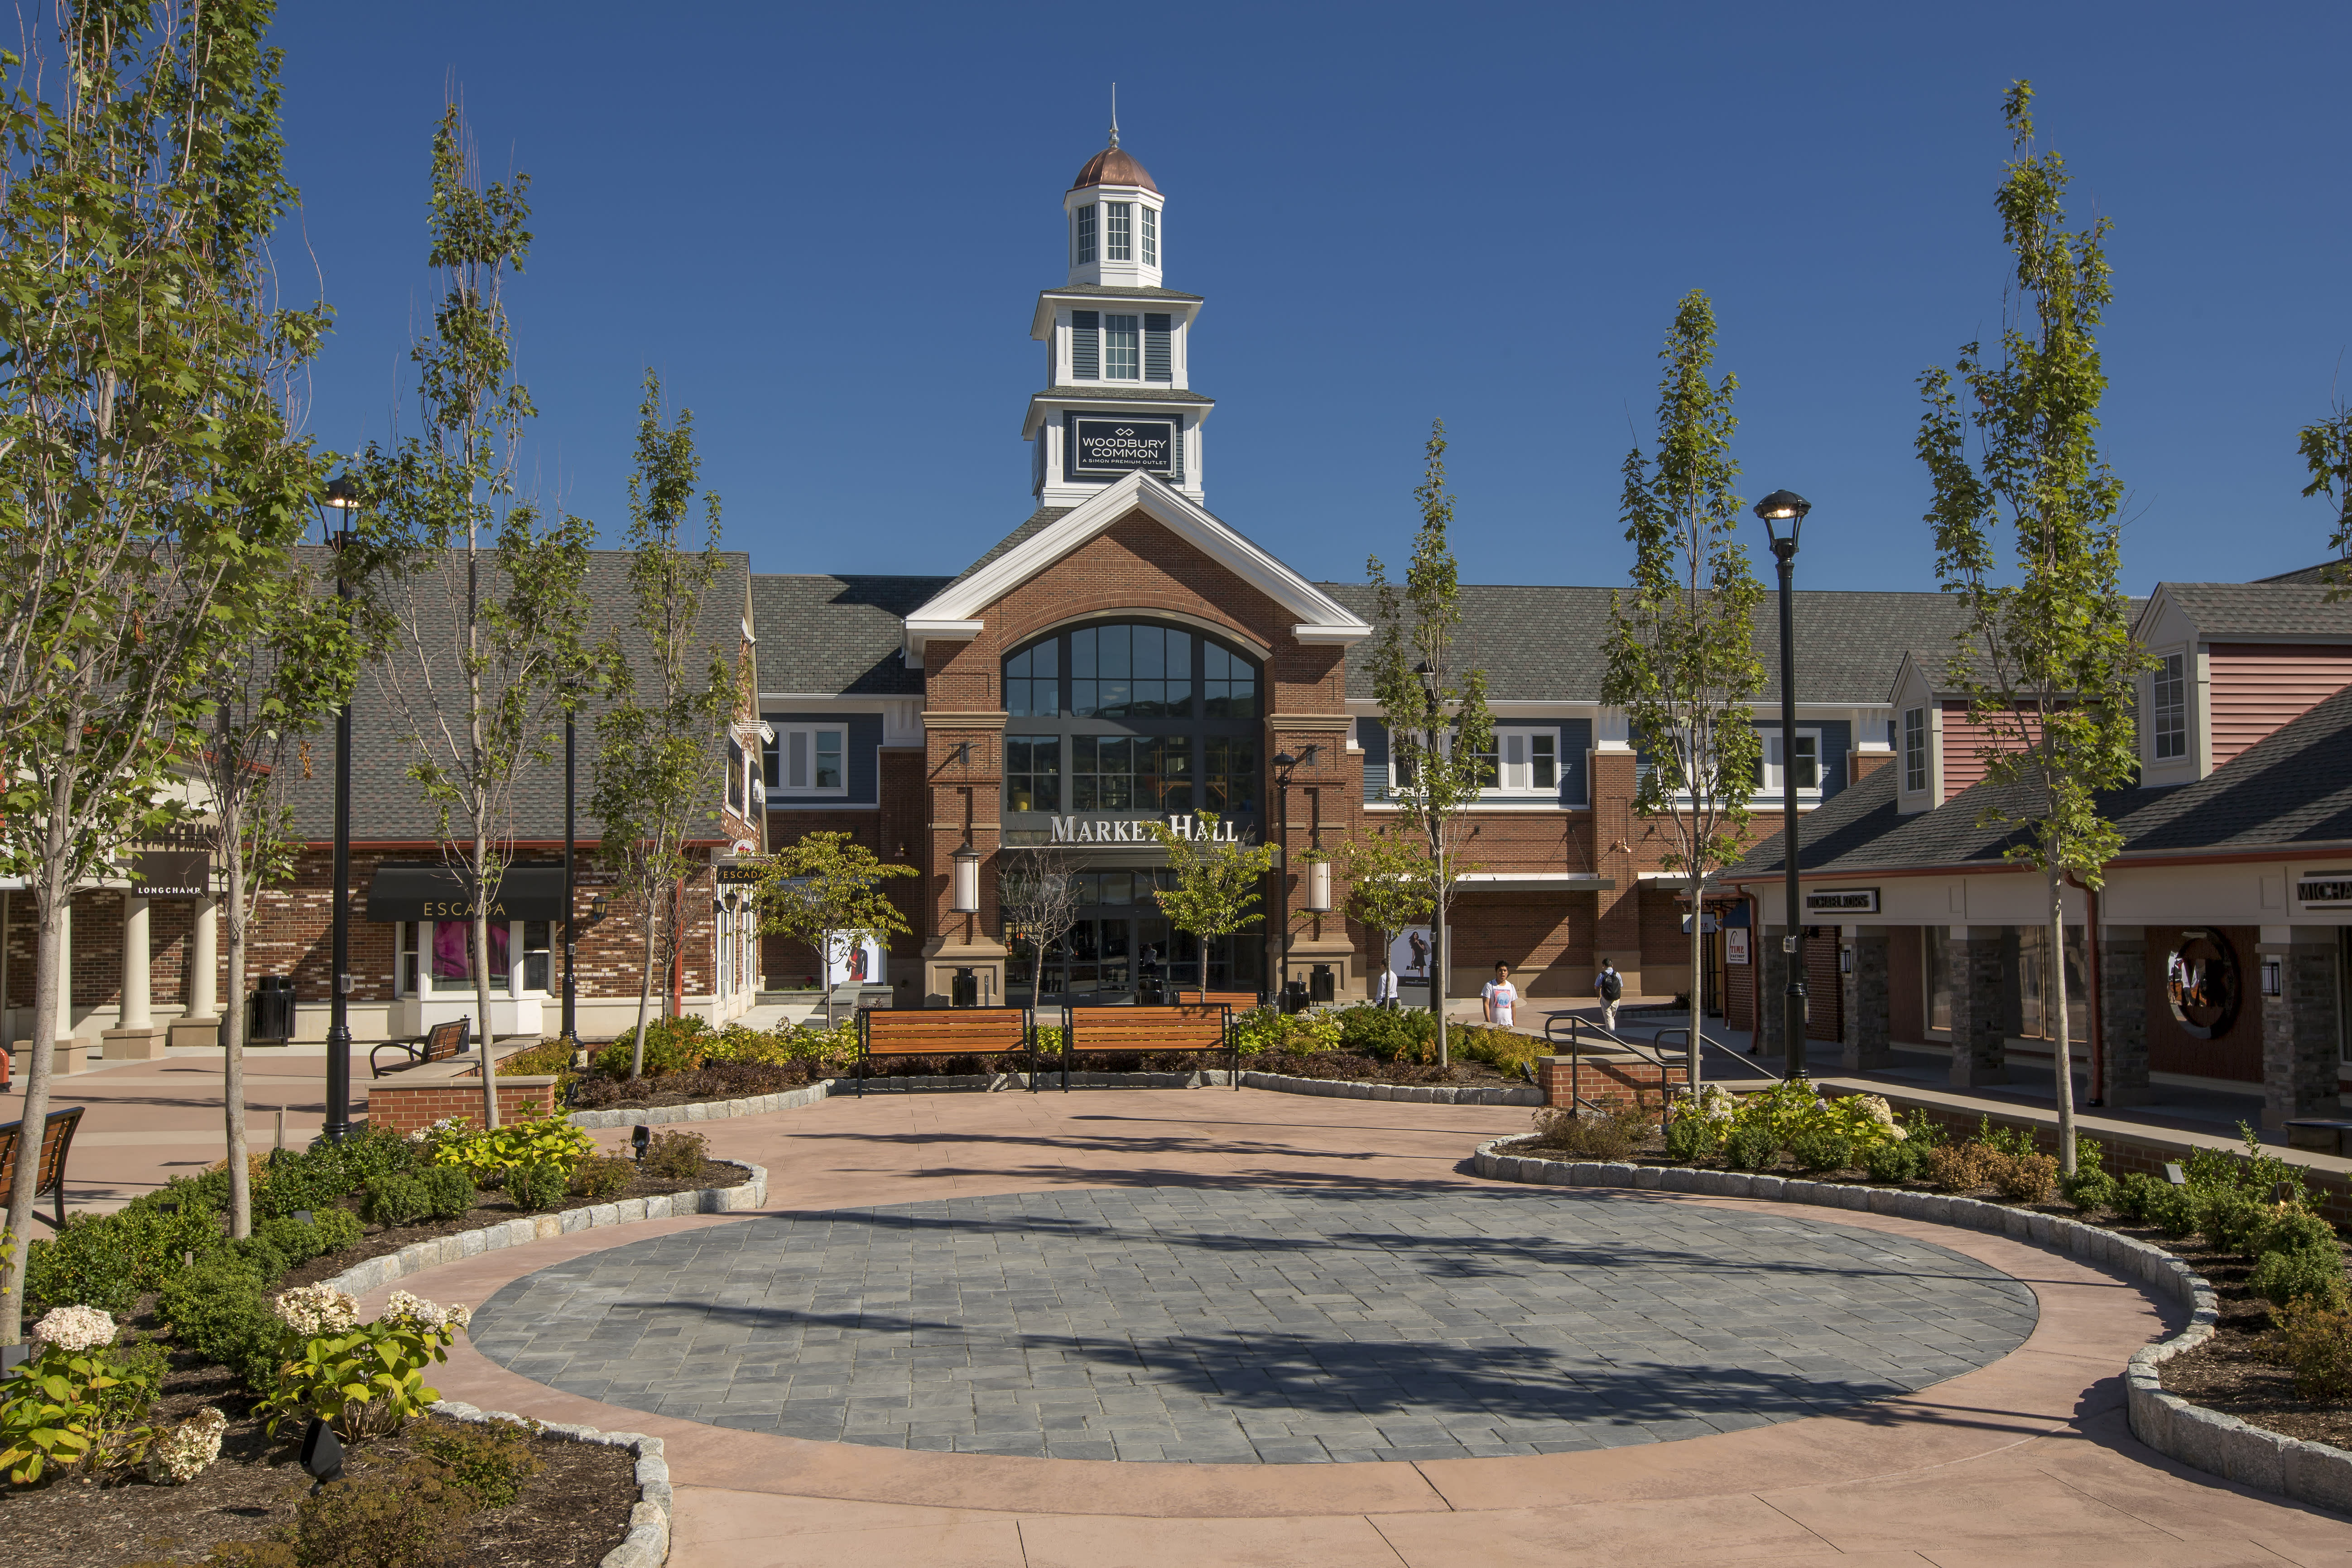 Woodbury Common Premium Outlets | Central Valley, NY 10917